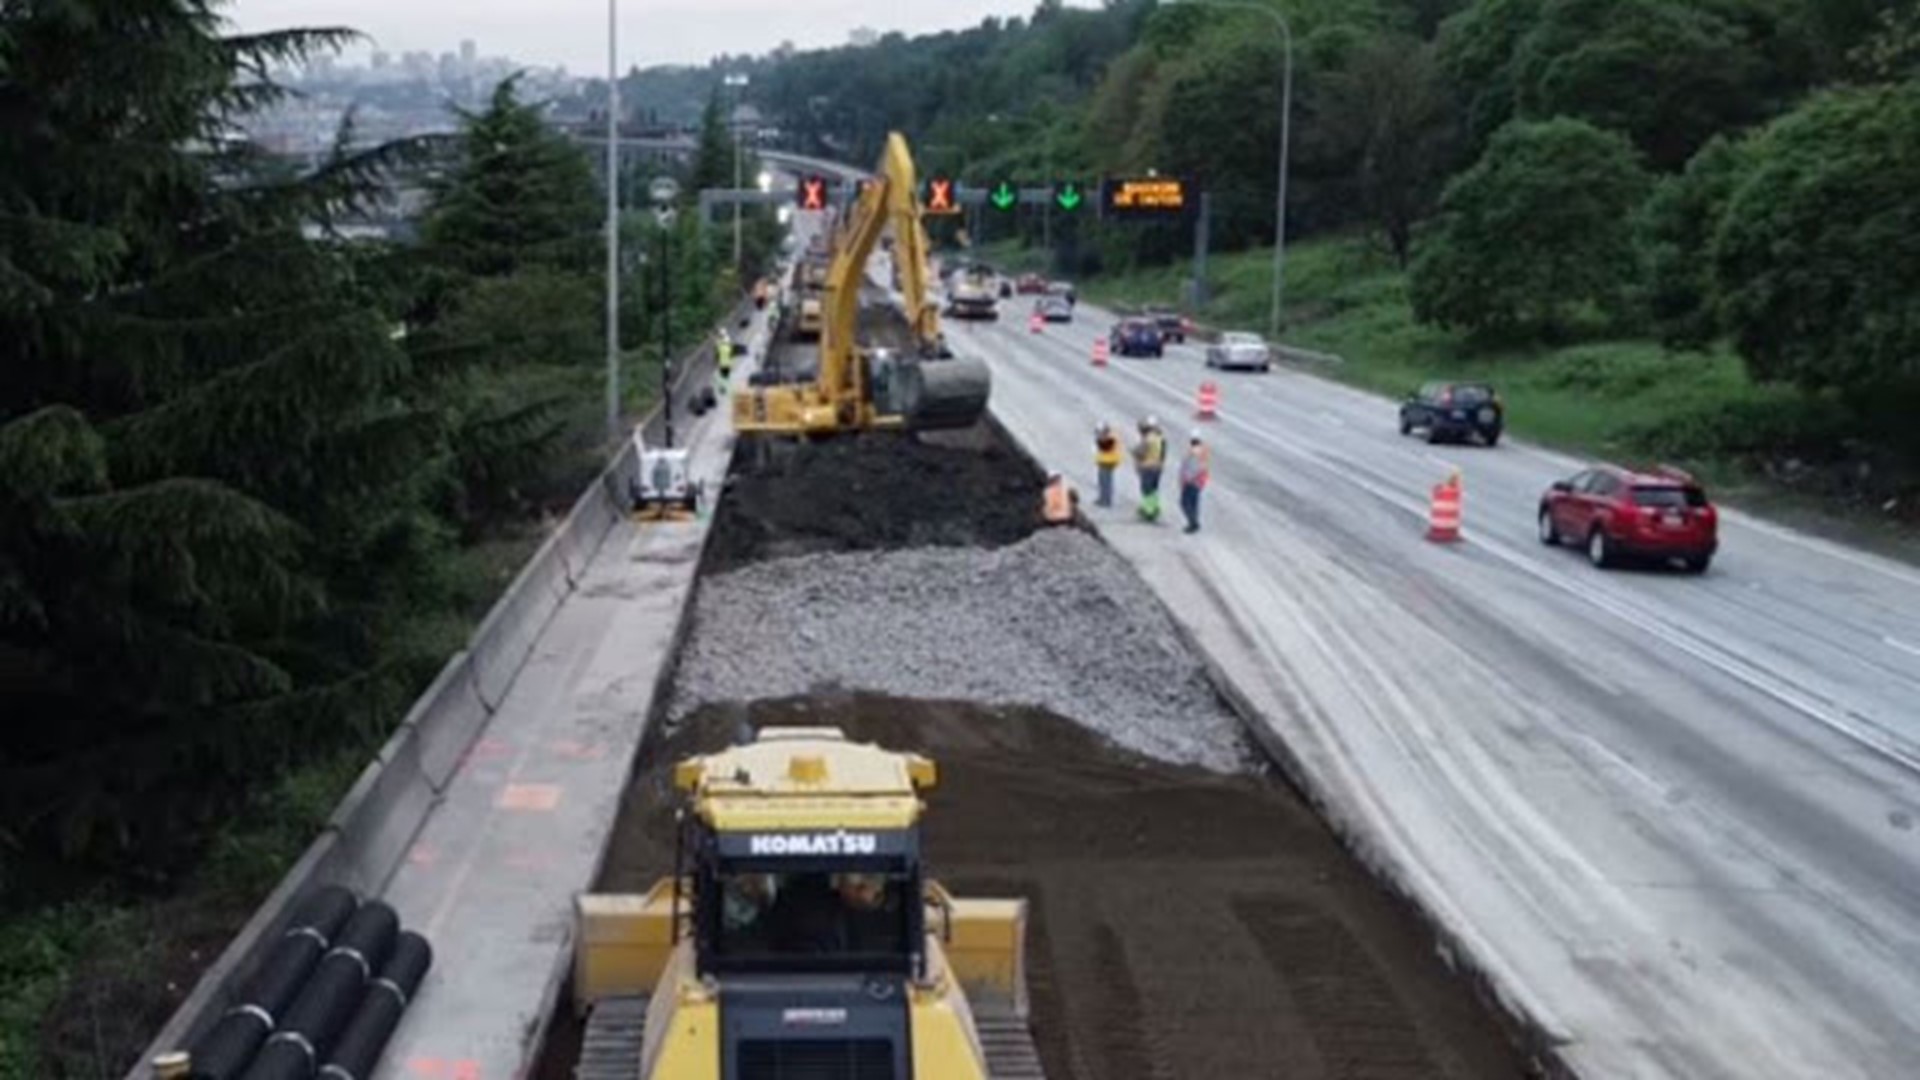 Scheduled repair work on expansion joints on I-5 in Seattle has been postponed